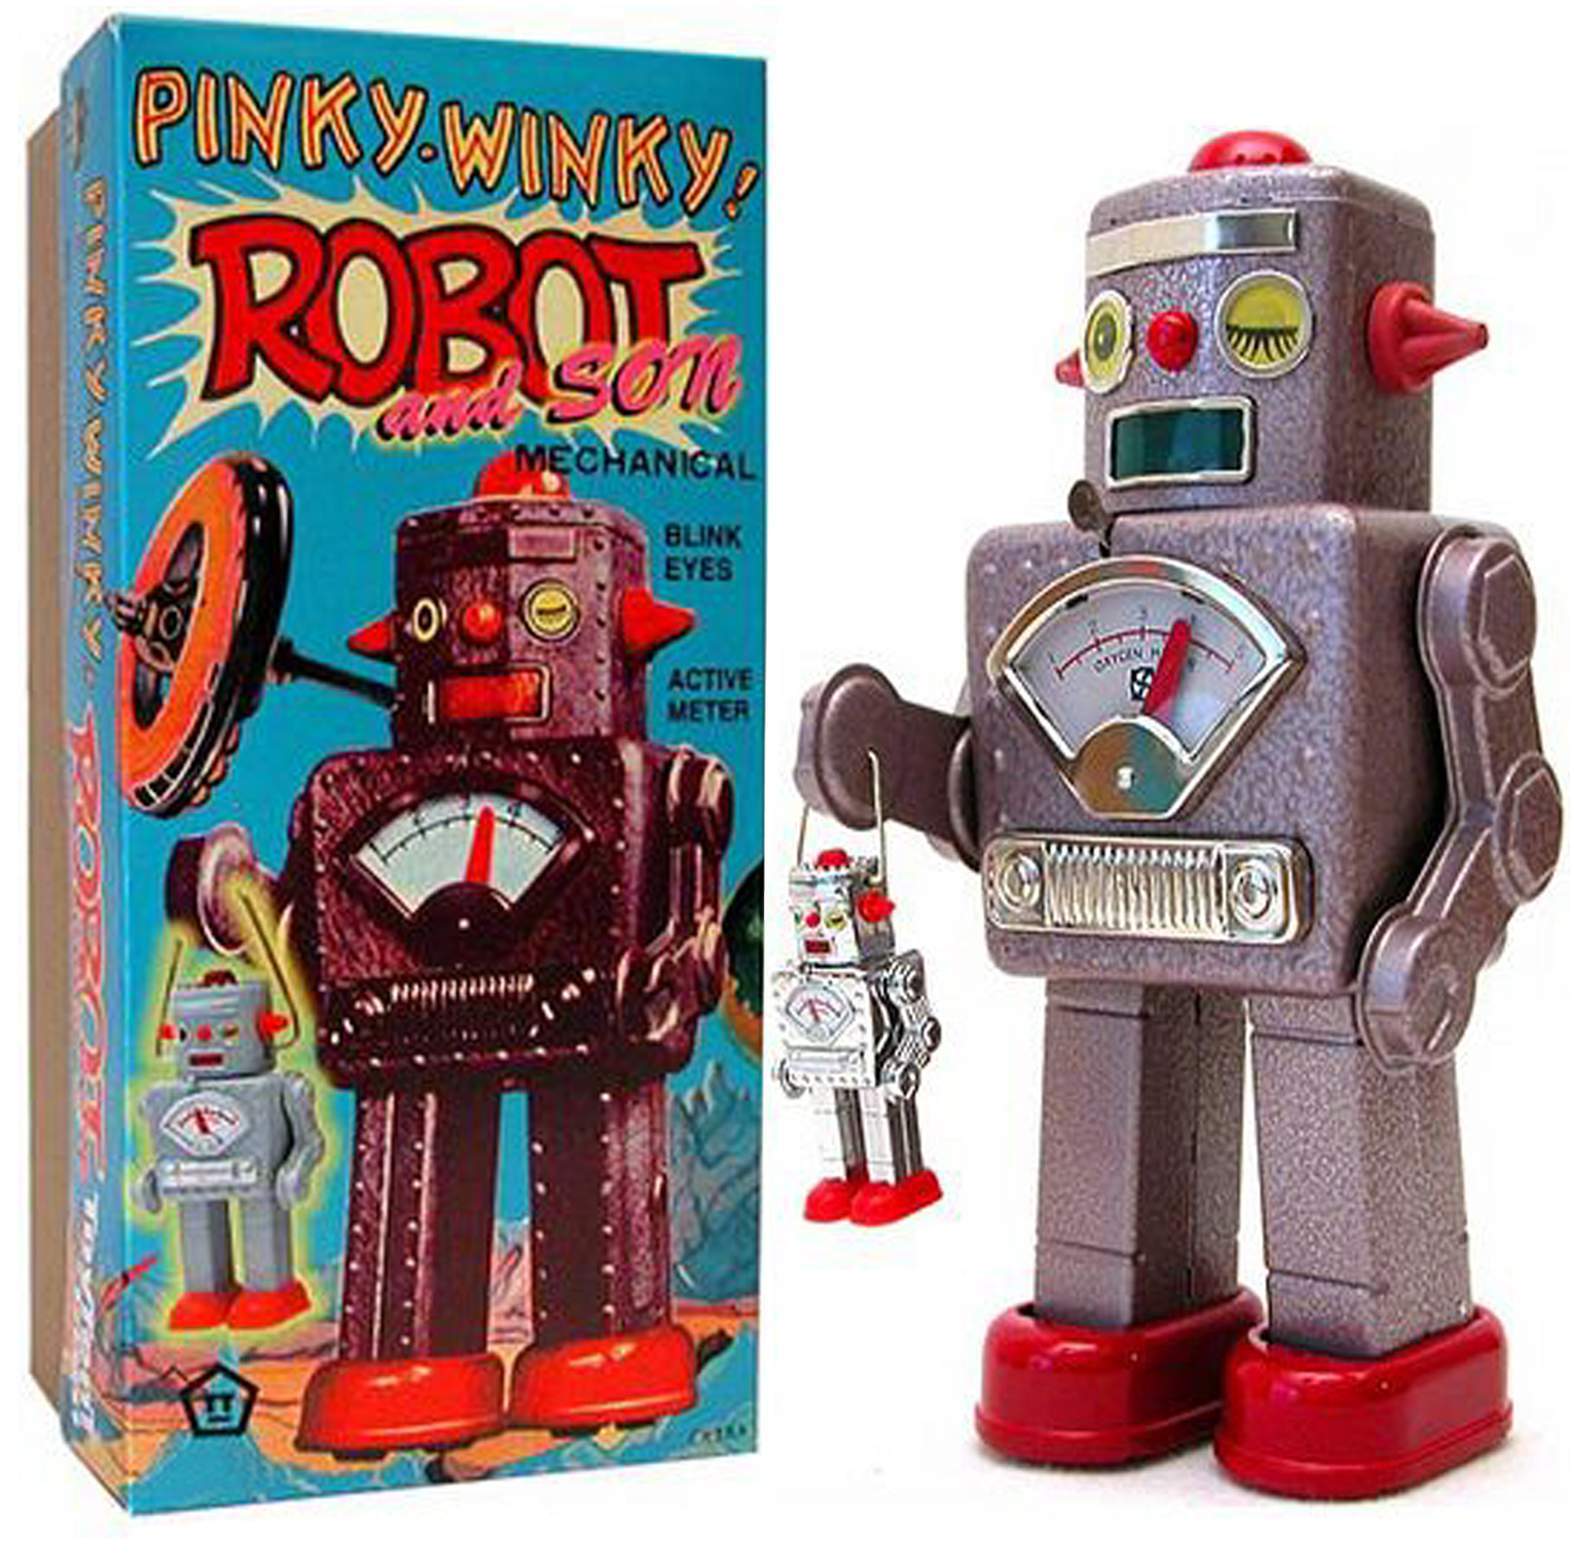 Winky Robot made by Yonezawa in Japan - The Old Robots Web Site